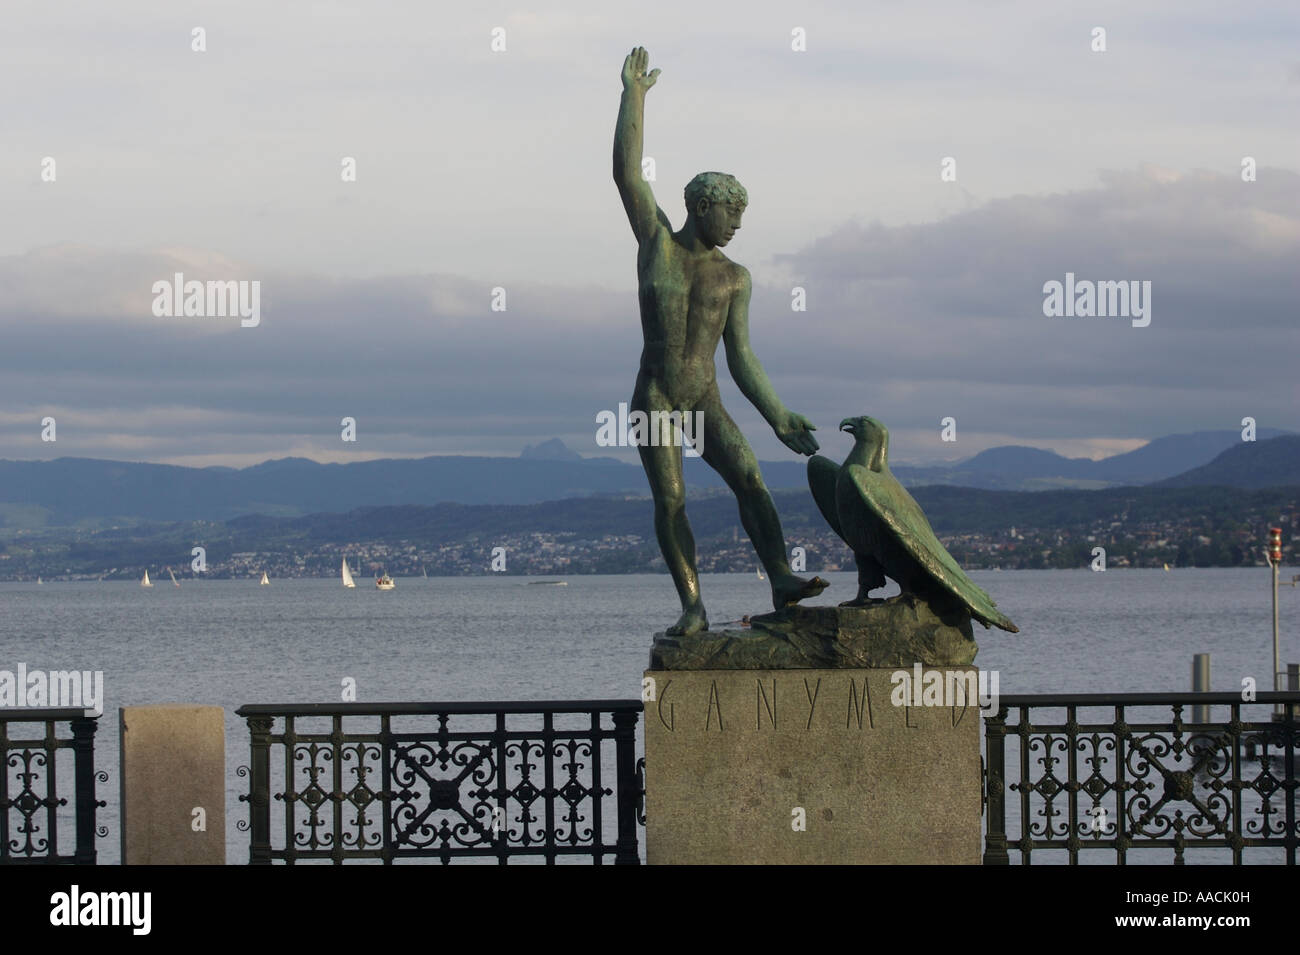 Ganymed statue in front of the Zurich Lake at the Brueckli Square in Zurich, Switzerland Stock Photo